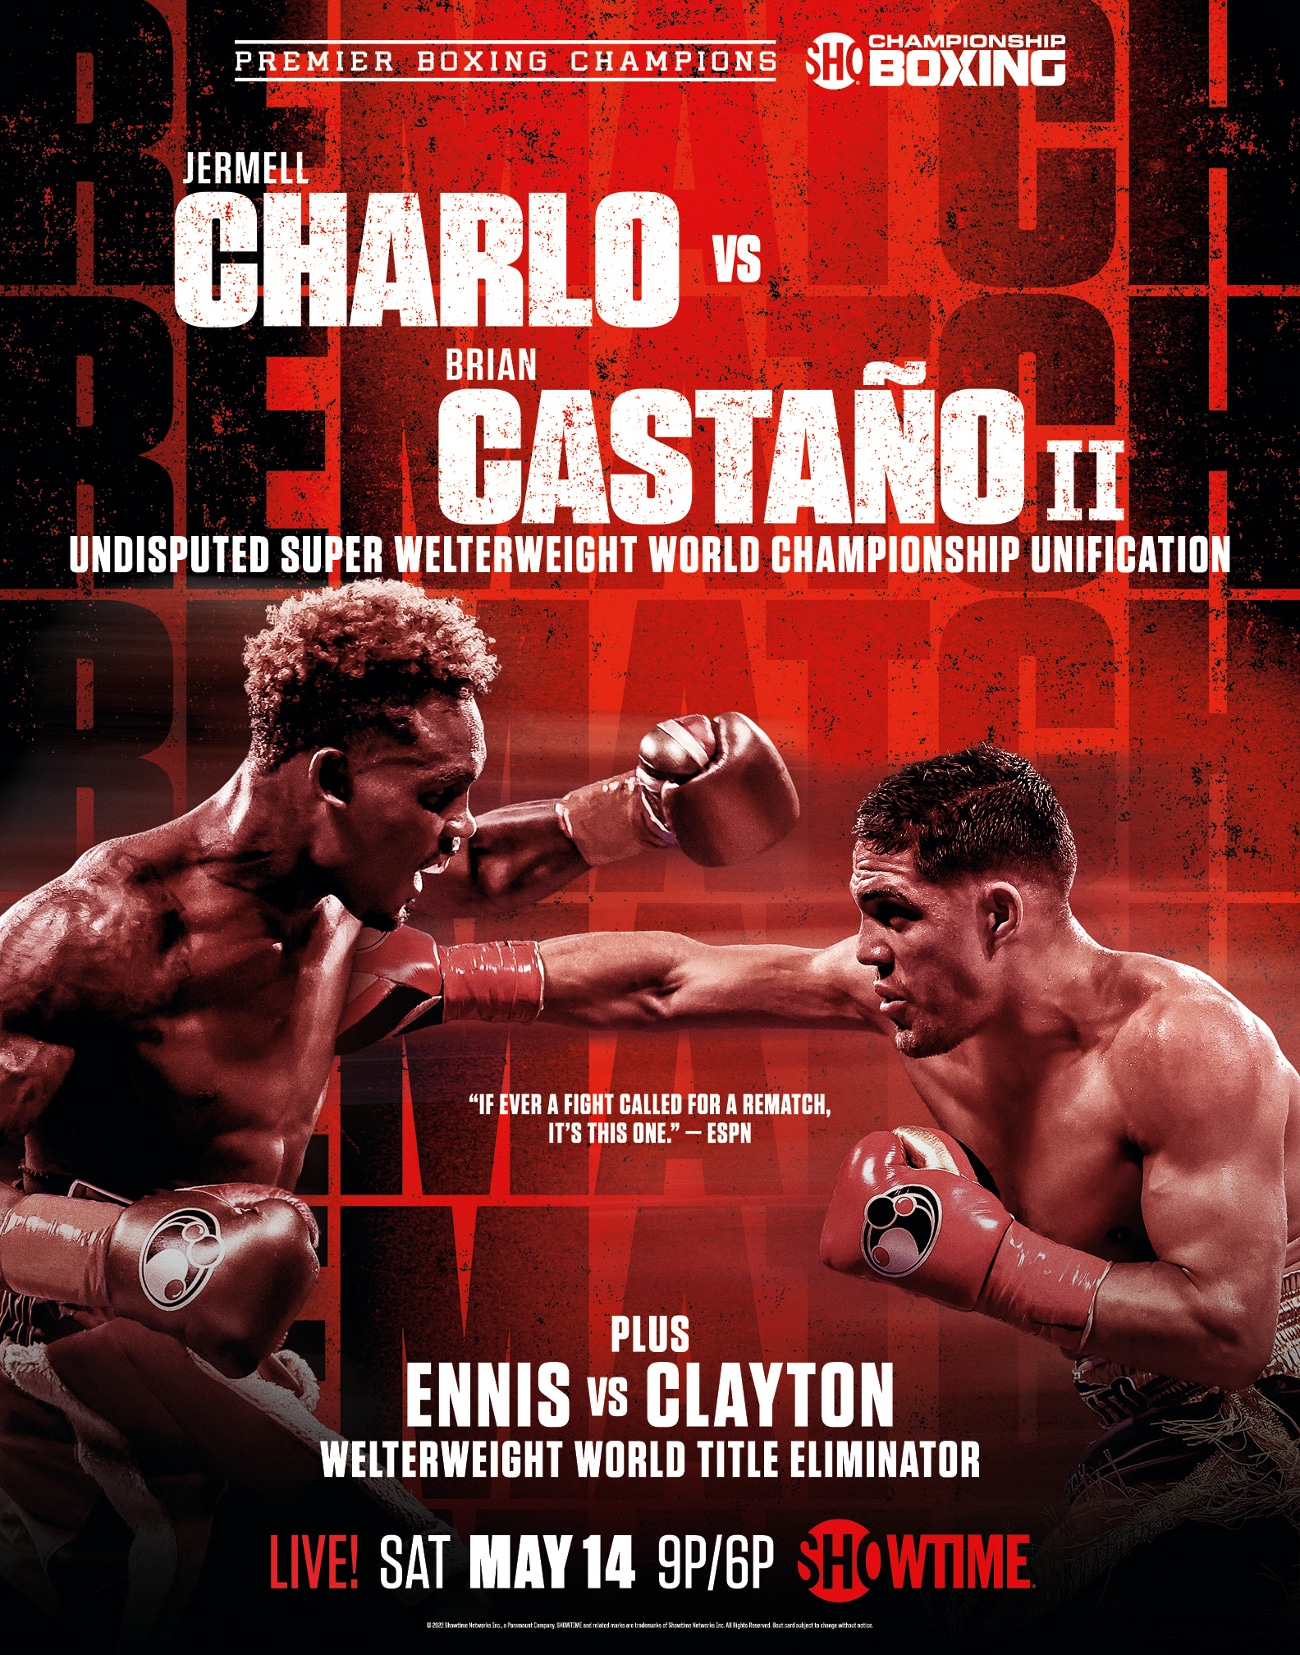 Image: Jermell Charlo vs. Brian Castano 2 this Saturday on Showtime